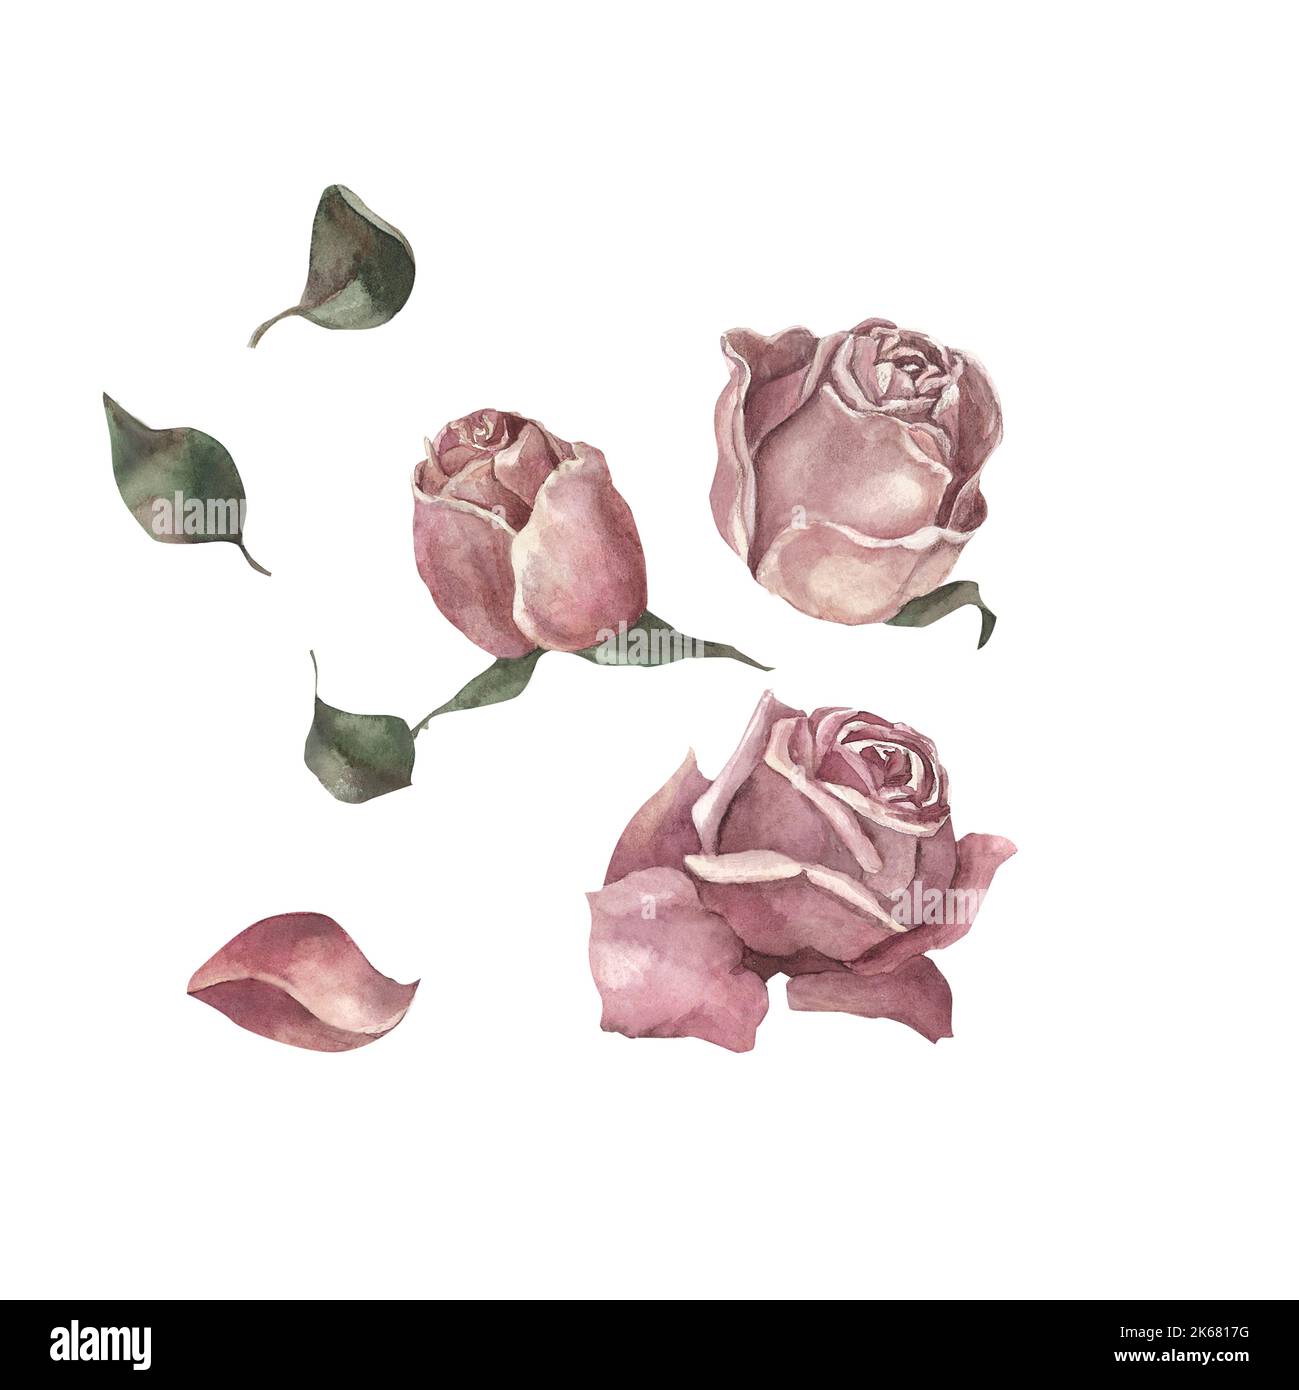 Roses. Isolated. For advertising, banners, posters, templates, stickers, templates, labels. Women's theme, travel, beauty, floristry, fashion, vintage Stock Photo